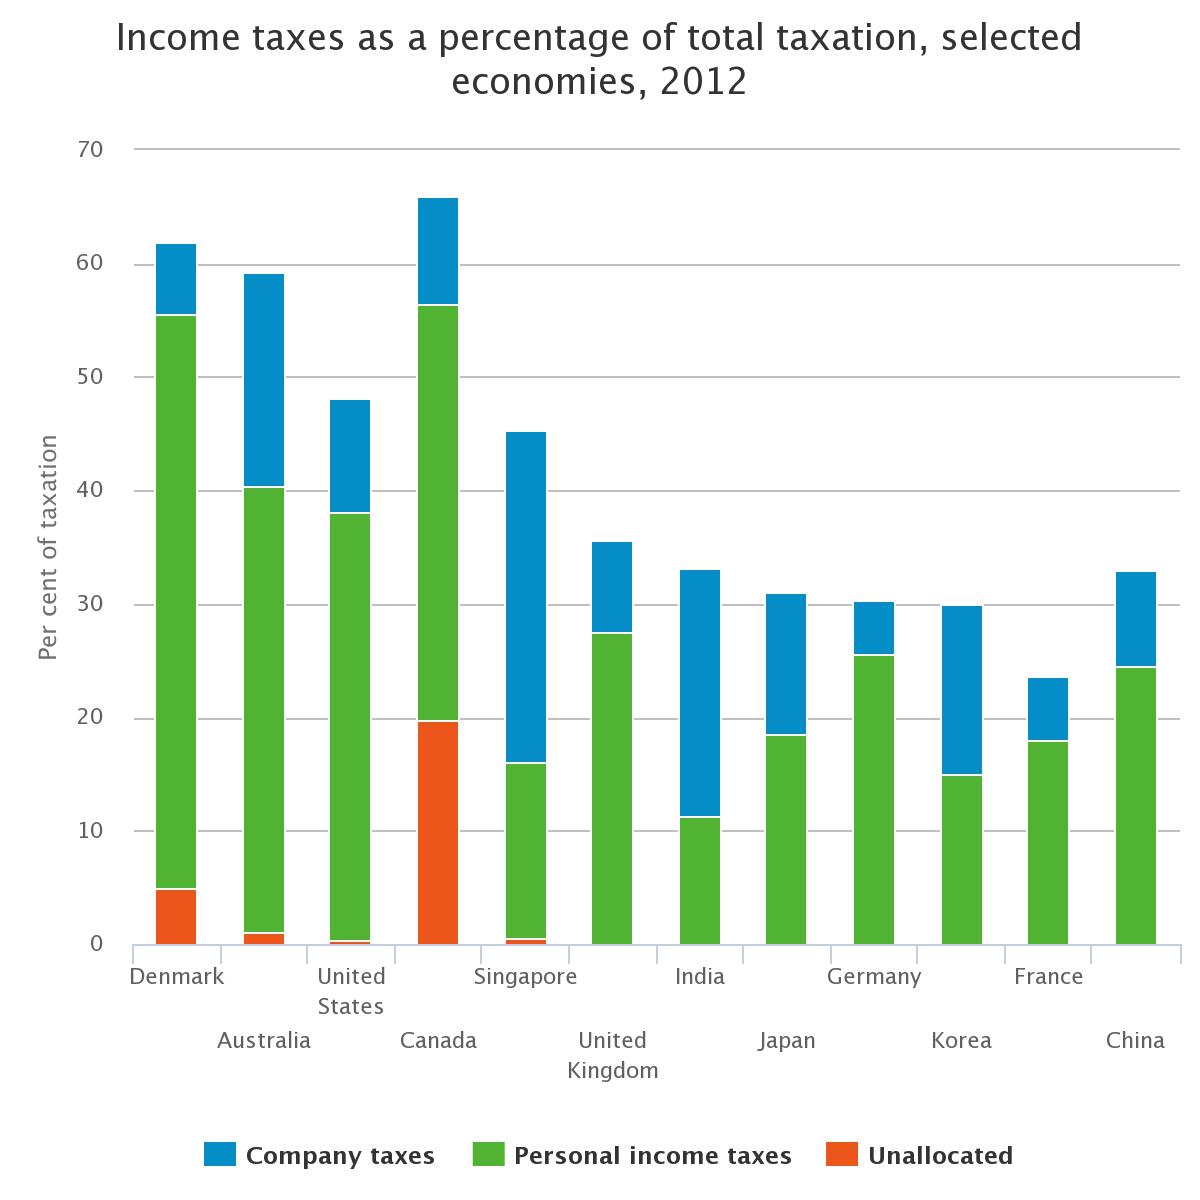 Income taxes as a percentage of total taxation, selected economies, 2012